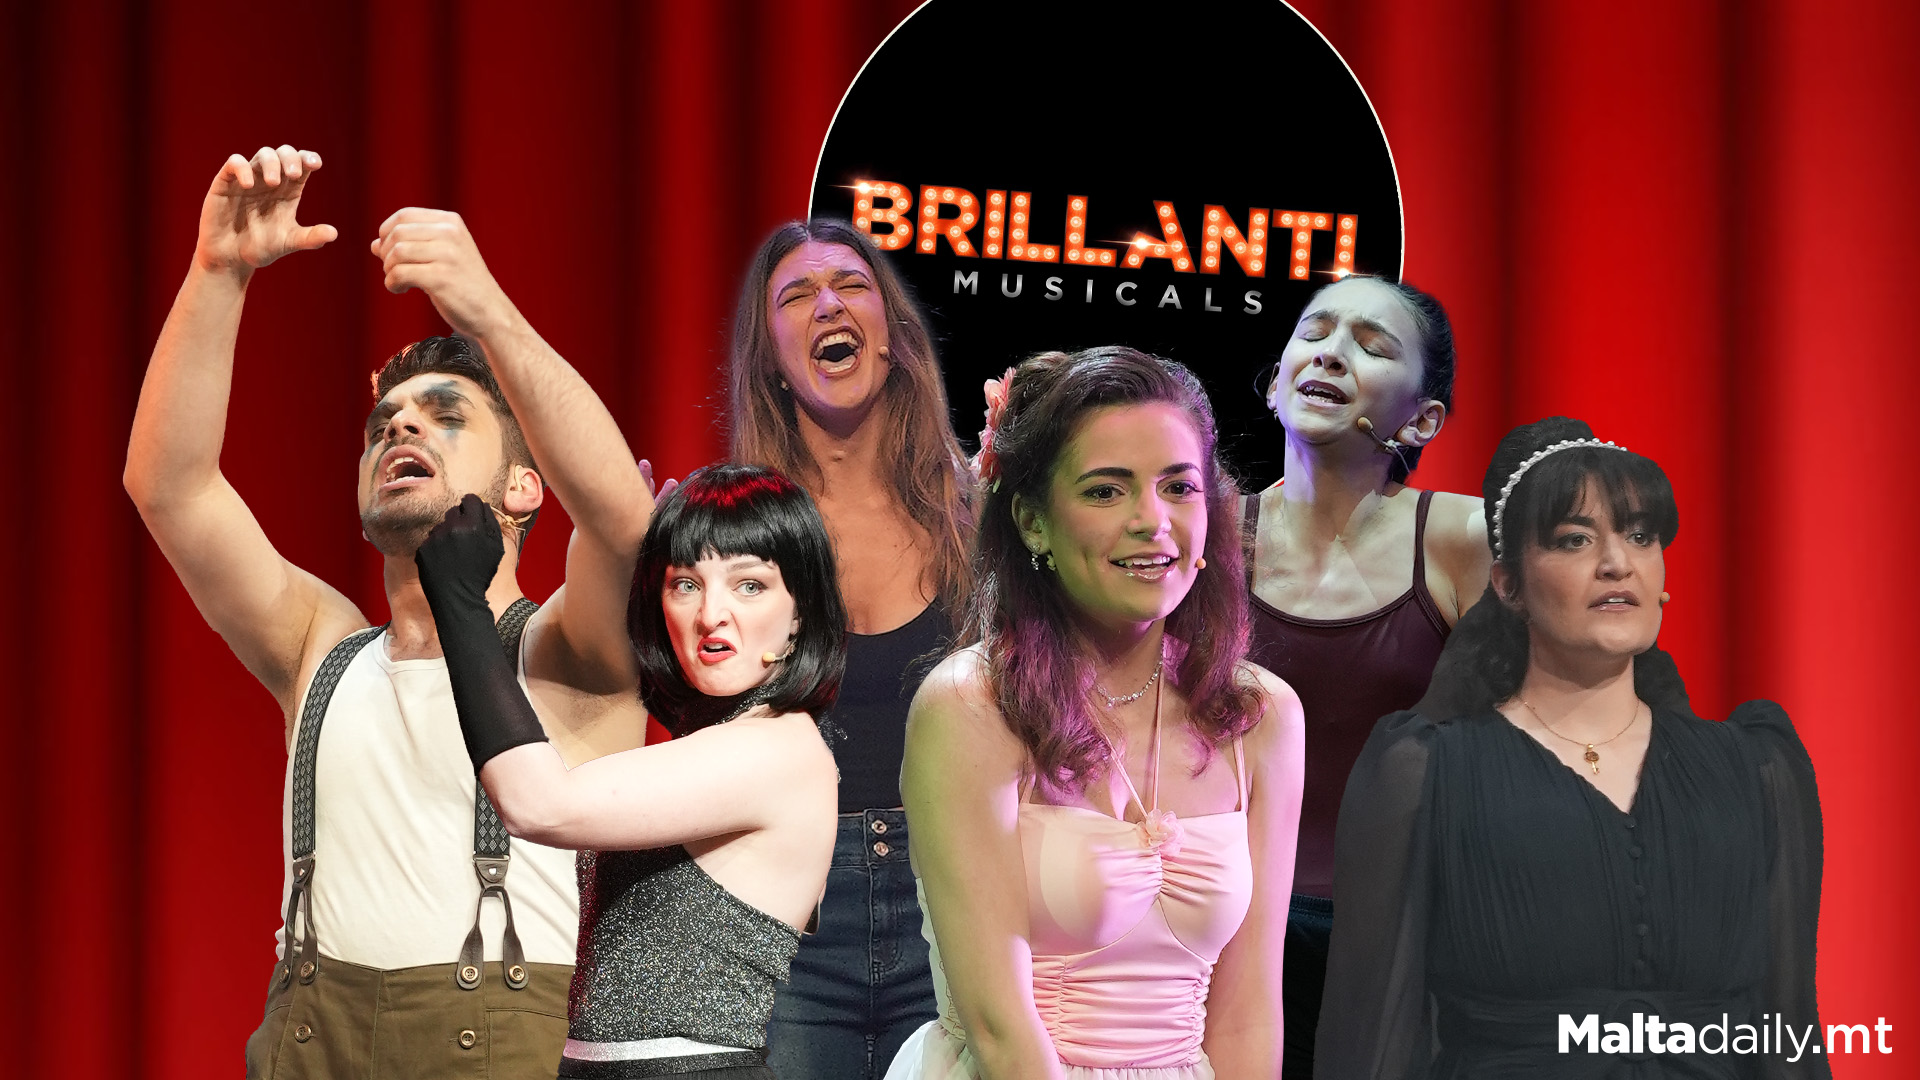 Here Are The Brillanti Finalists Competing Tonight!